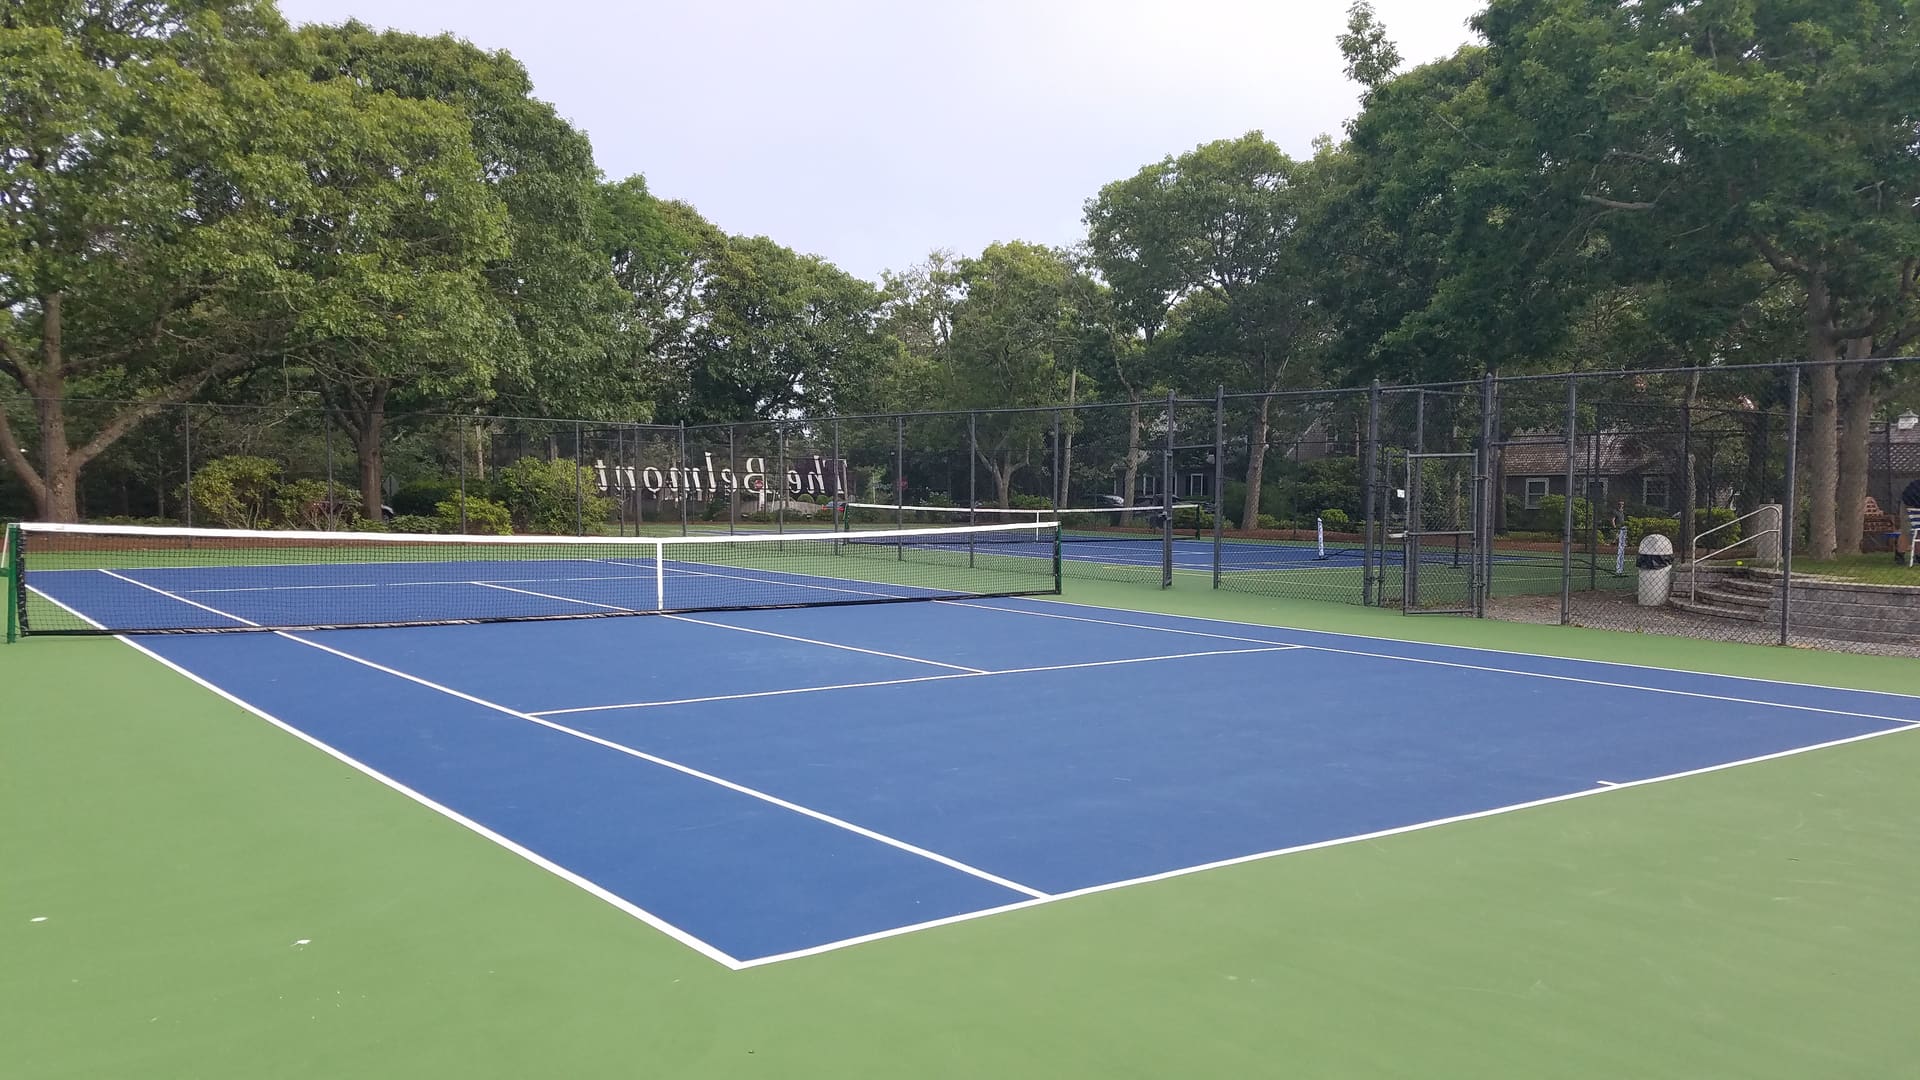 A tennis court with two different colors of blue and green.